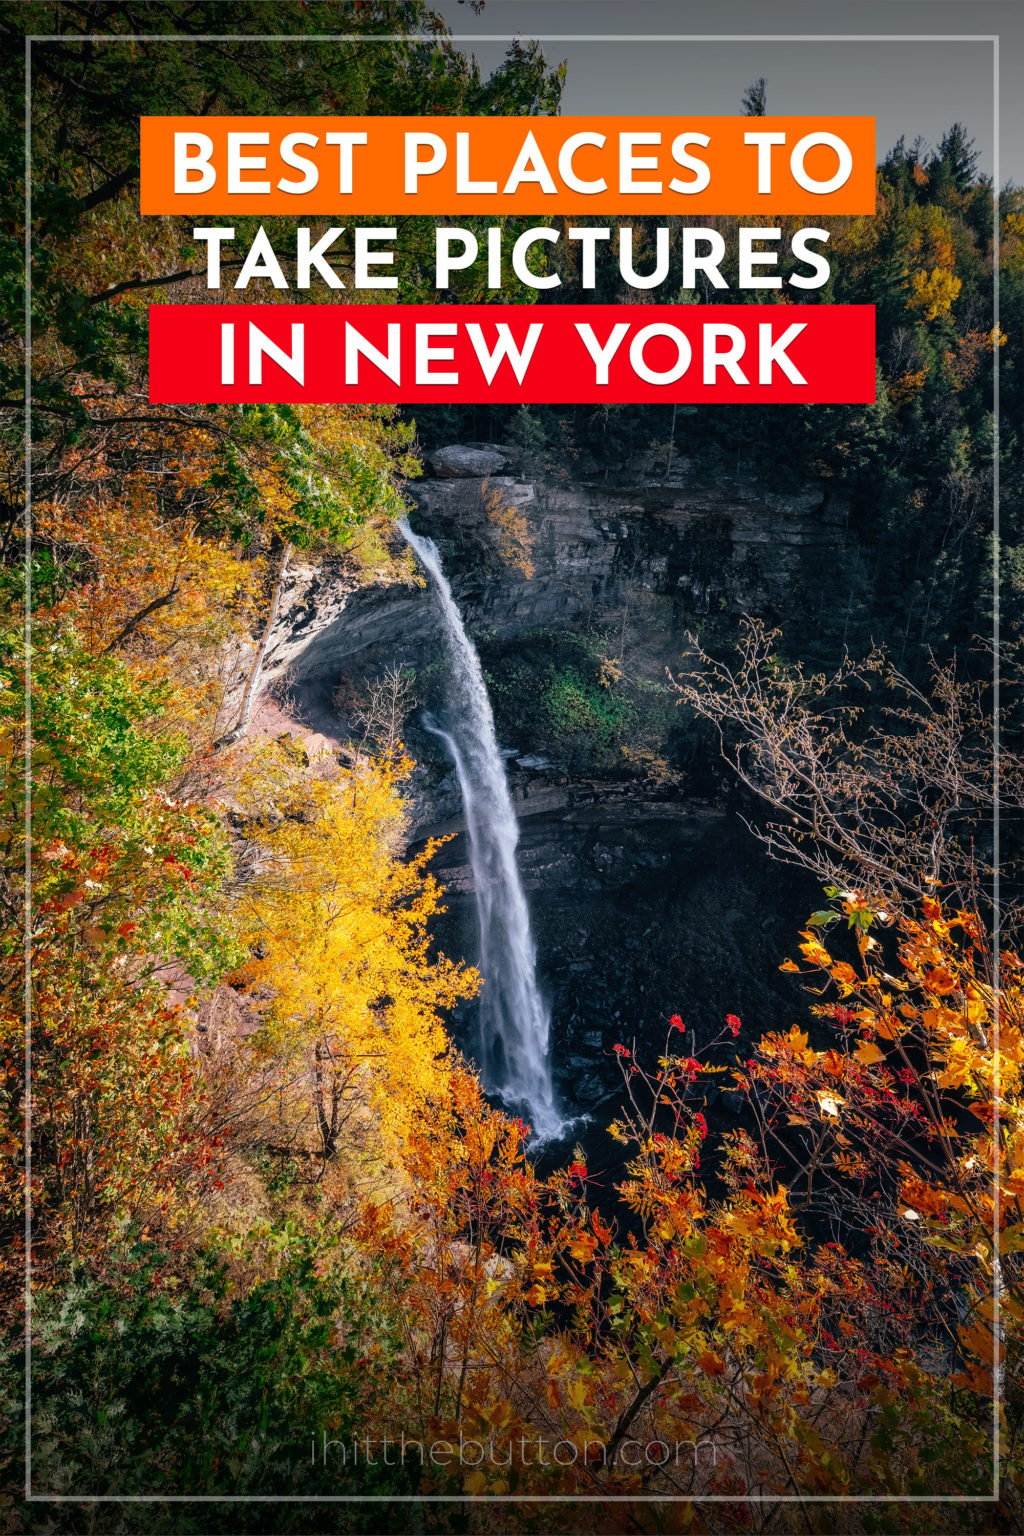 9 Best Places to Take Pictures in Upstate NY (Photo Guide)